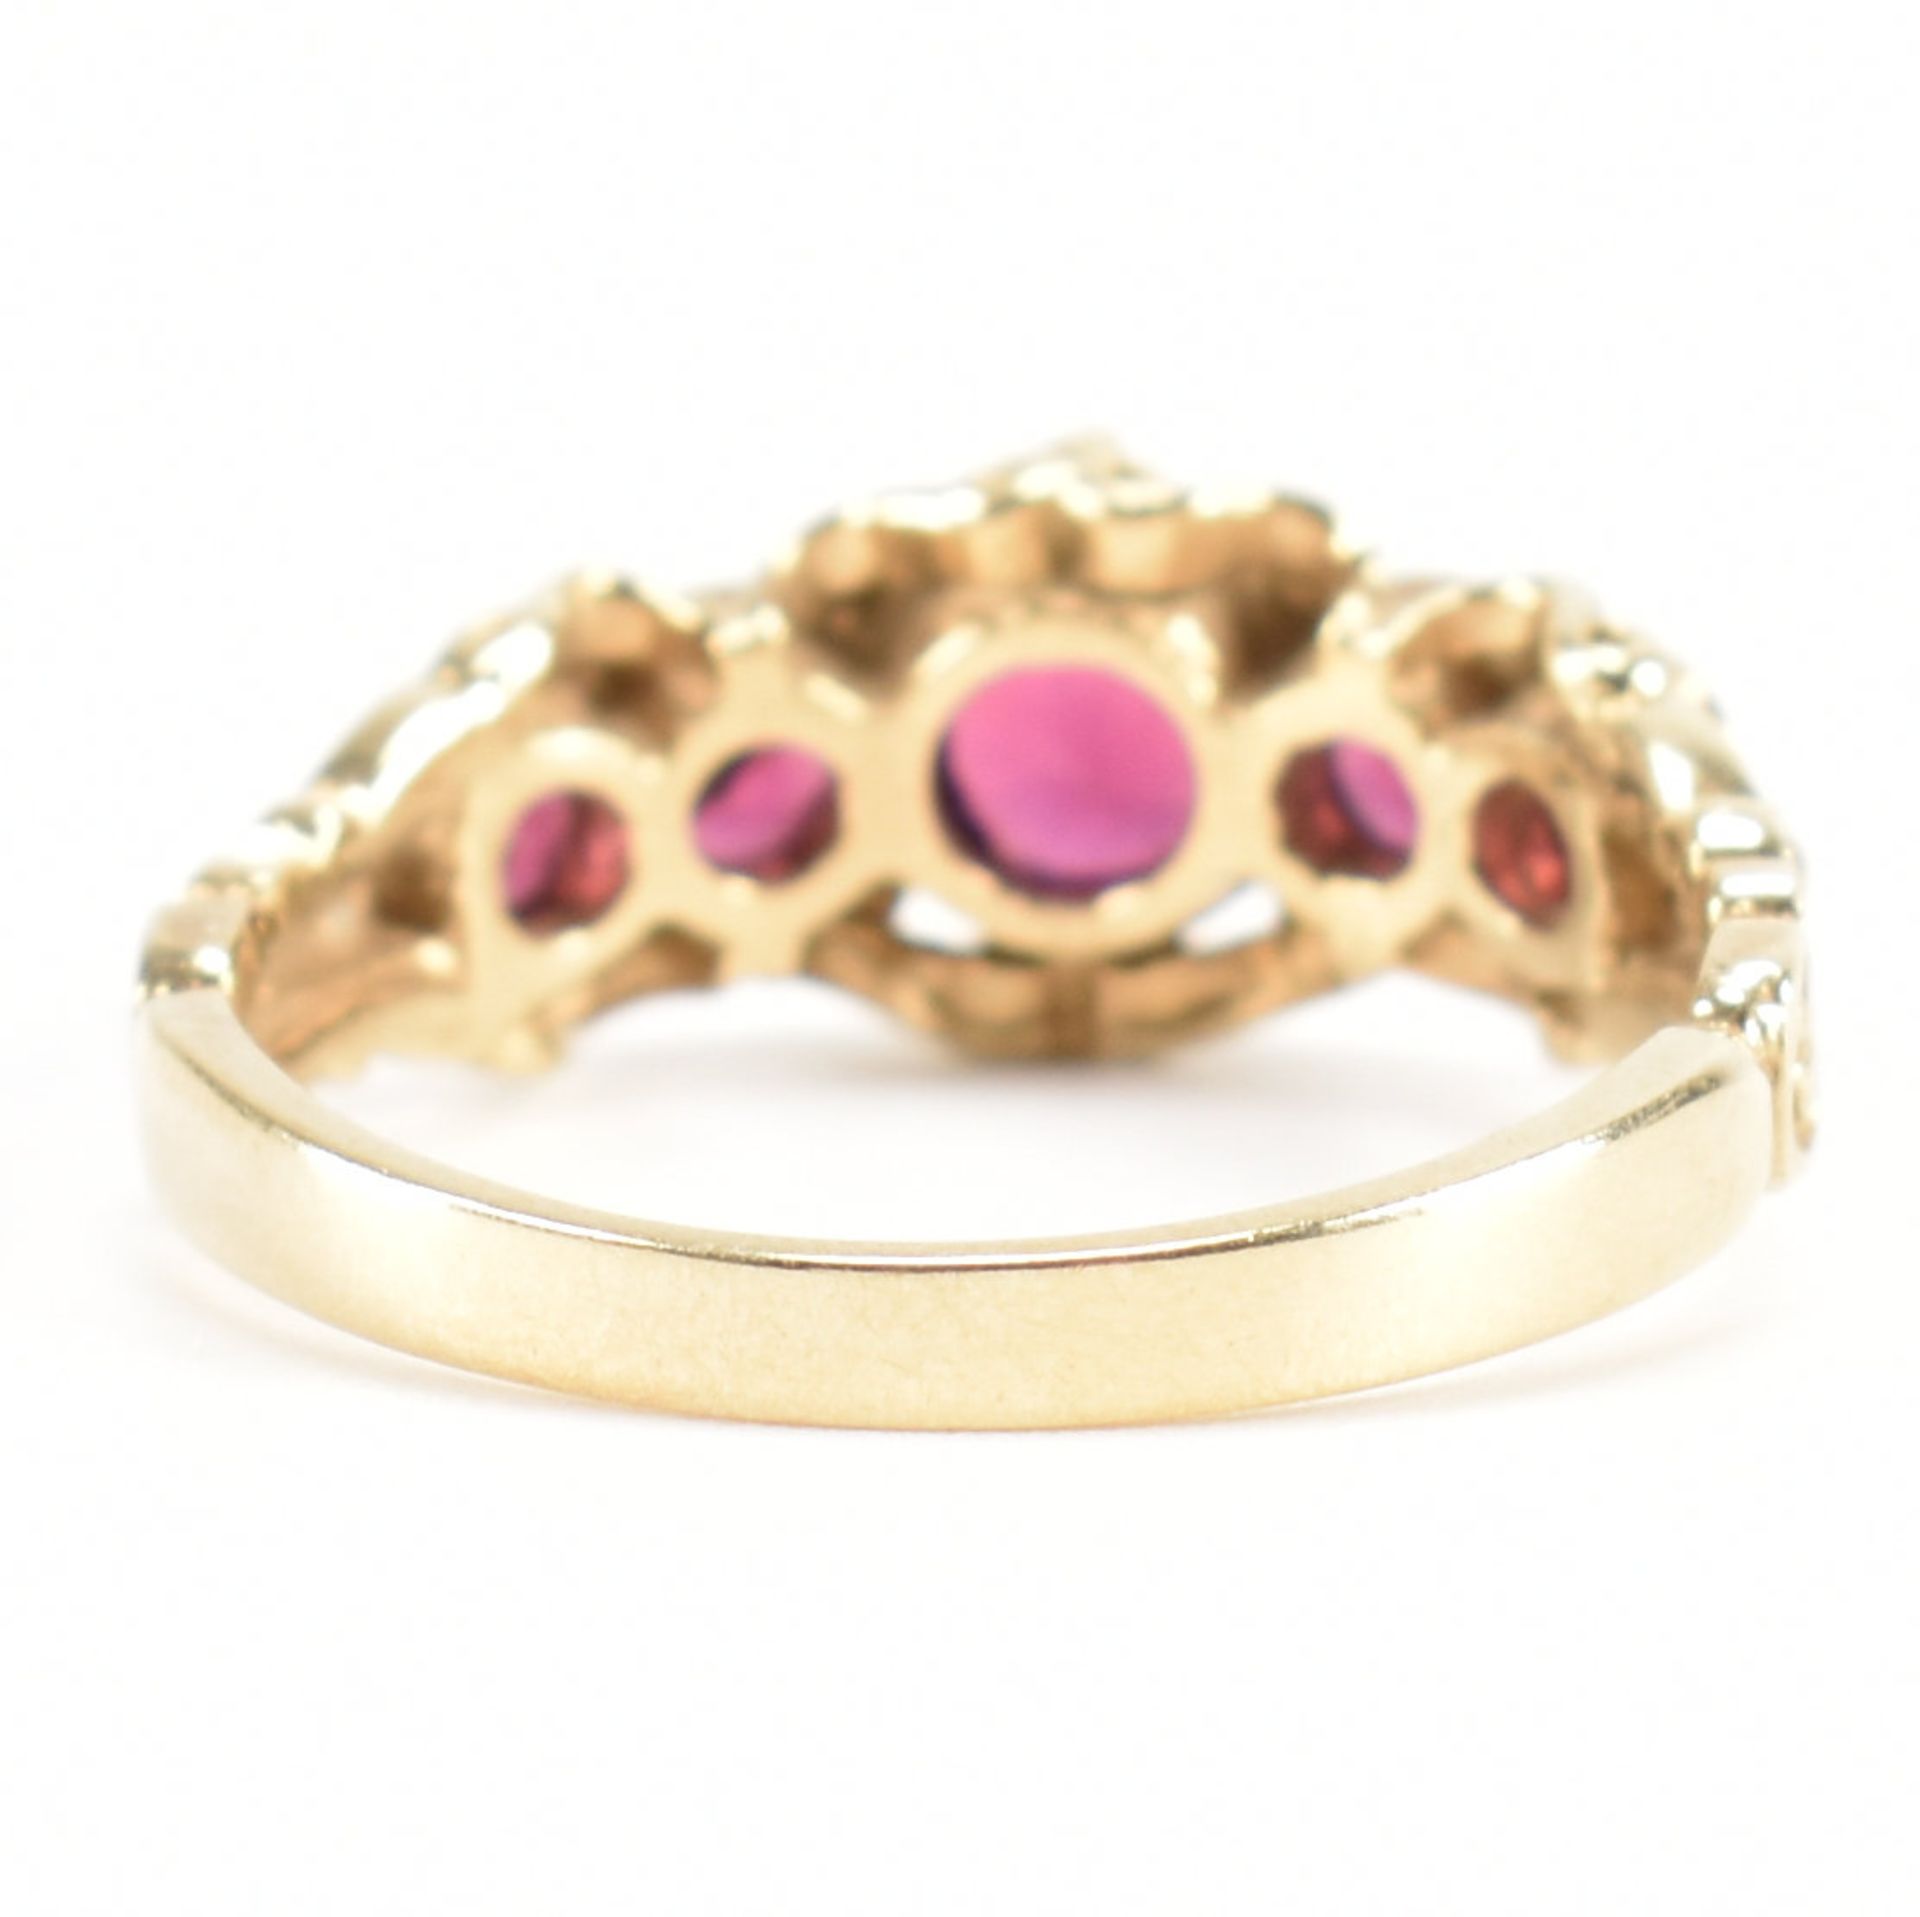 HALLMARKED 9CT GOLD FIVE STONE RING - Image 4 of 8